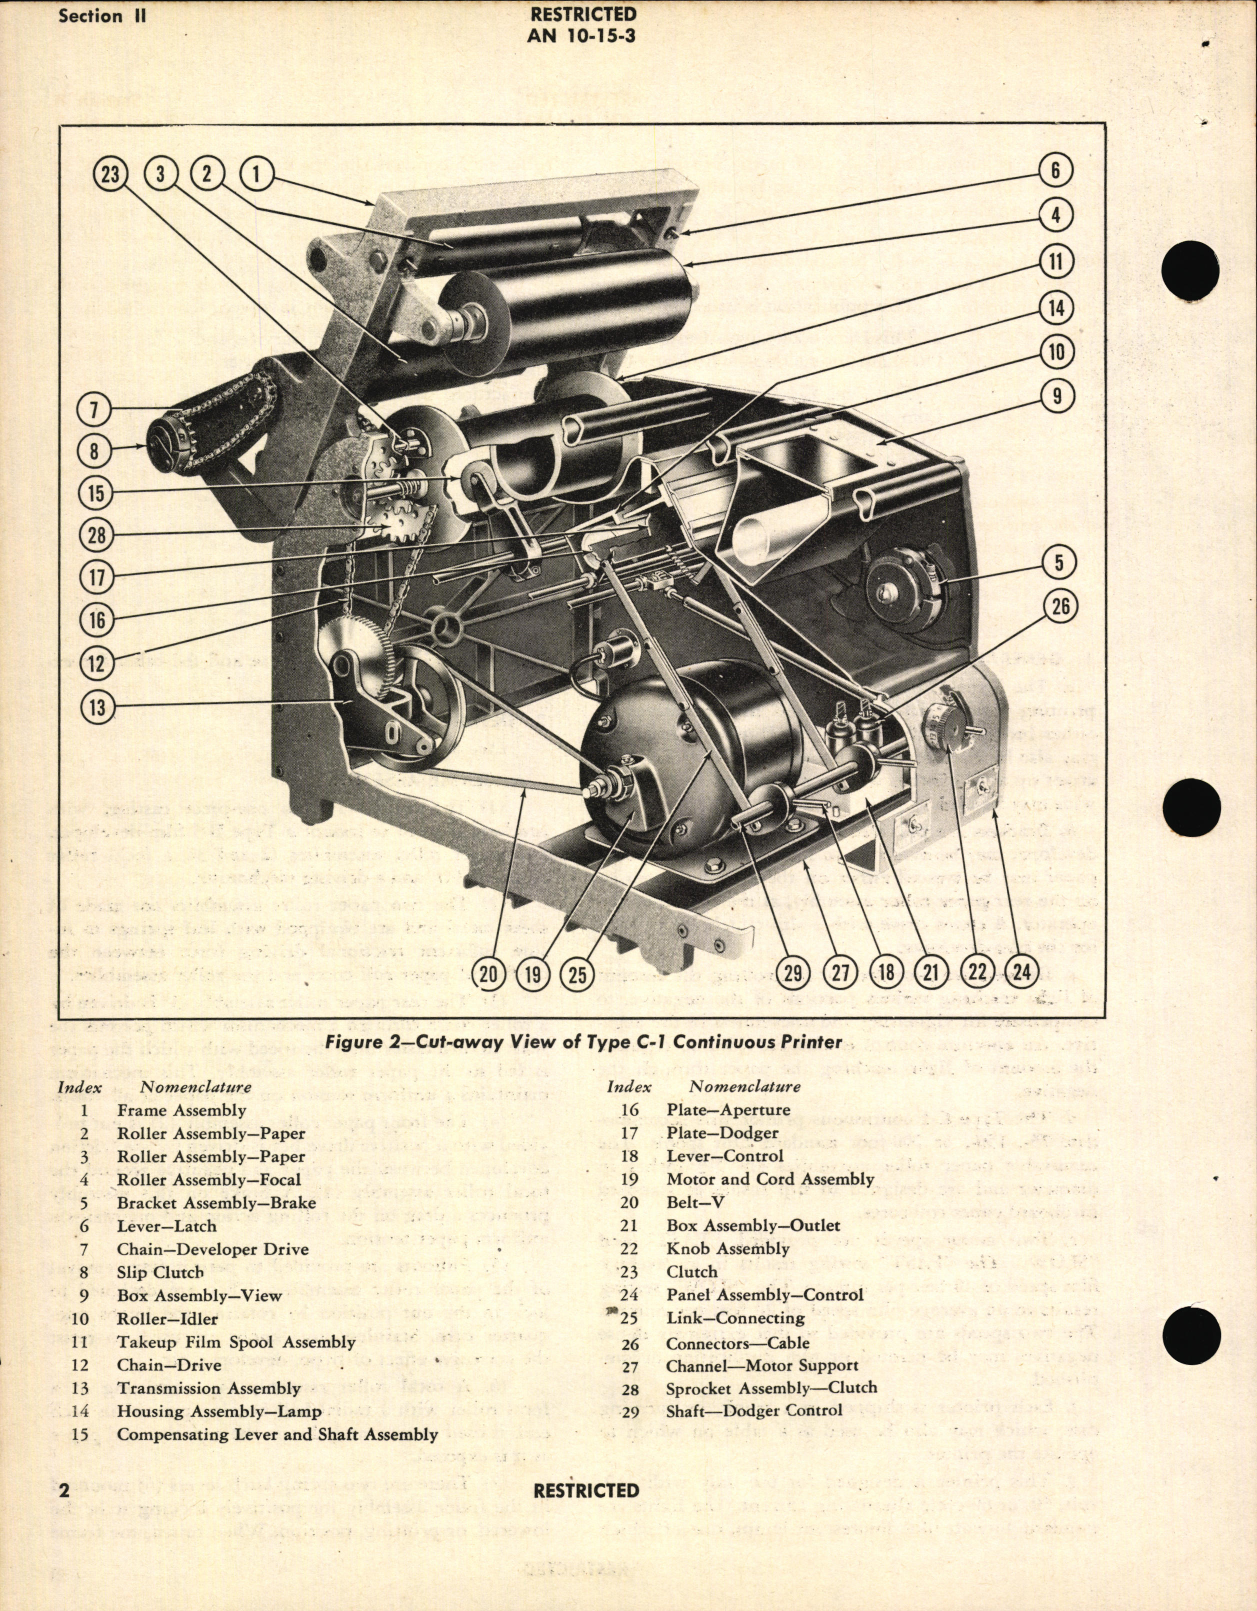 Sample page 6 from AirCorps Library document: Handbook of Instructions with Parts Catalog for Type C-1 Continuous Printer